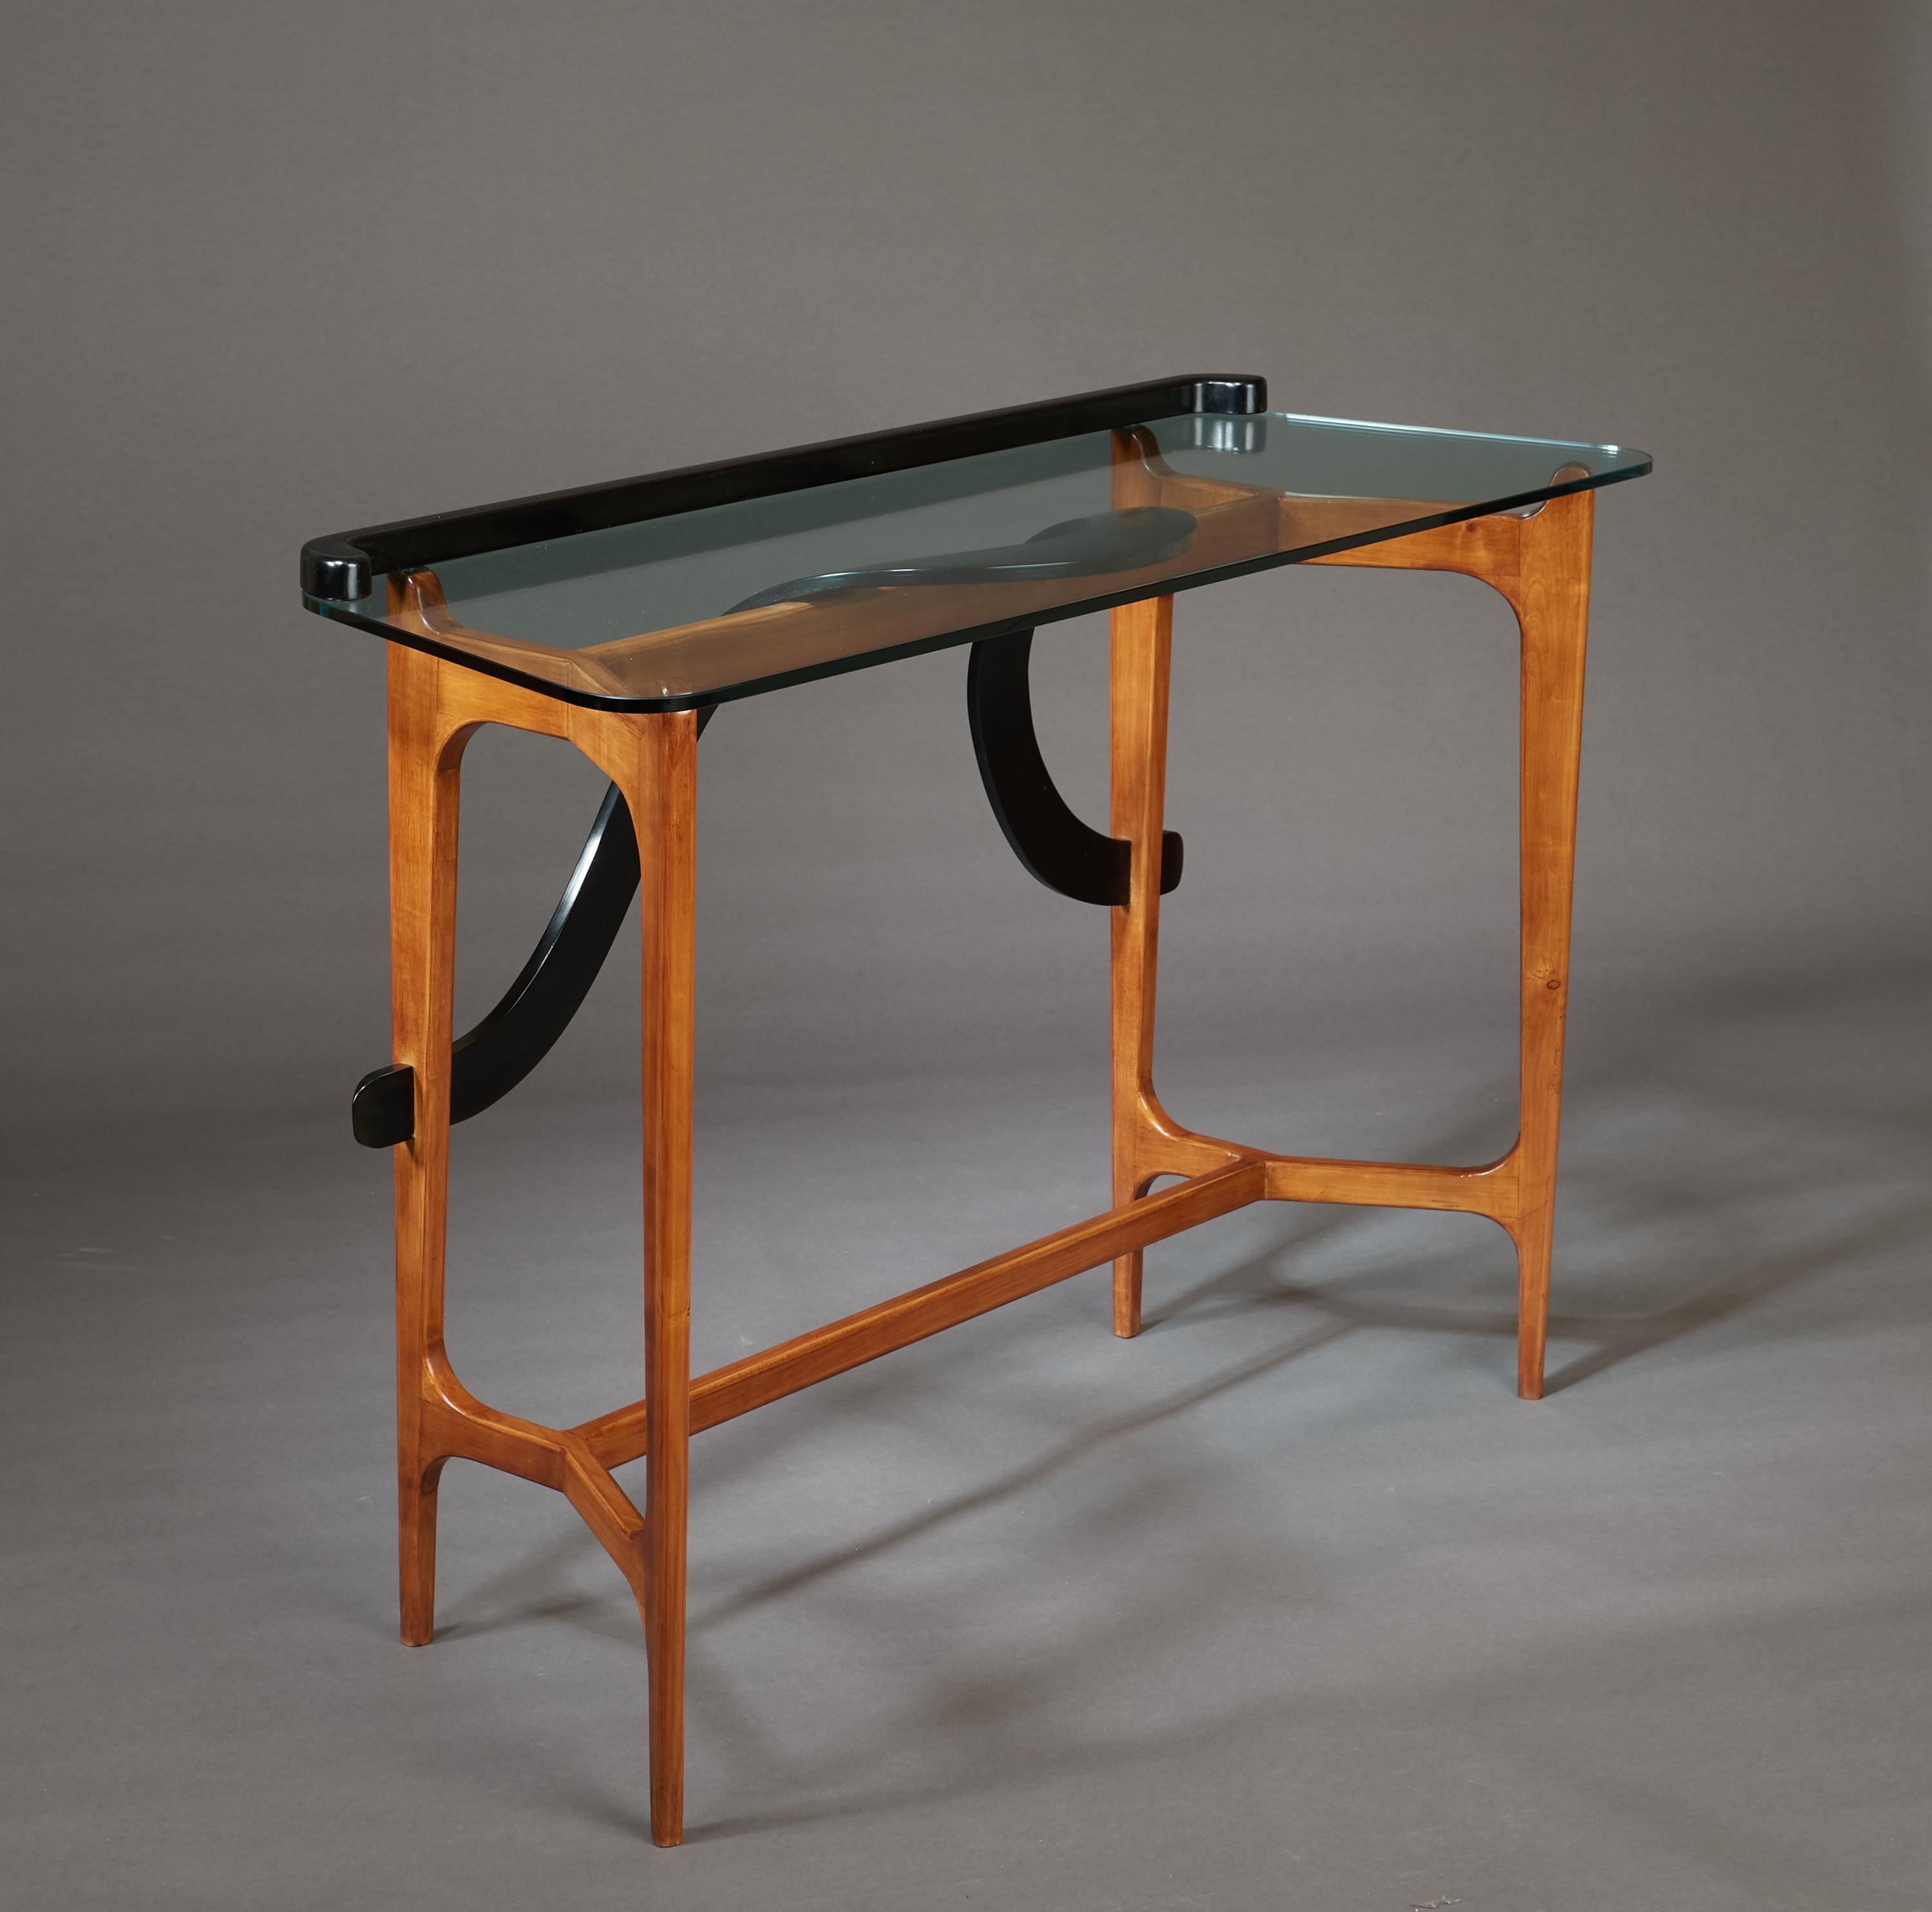 Ico Parisi (1916-1996)

An exceptional sculptural console by Ico Parisi in polished and lacquered walnut. The rounded glass plateau is raised on gracefully modeled and angled legs. A sinuous, starkly three-dimensional carved ribbon, in contrasting